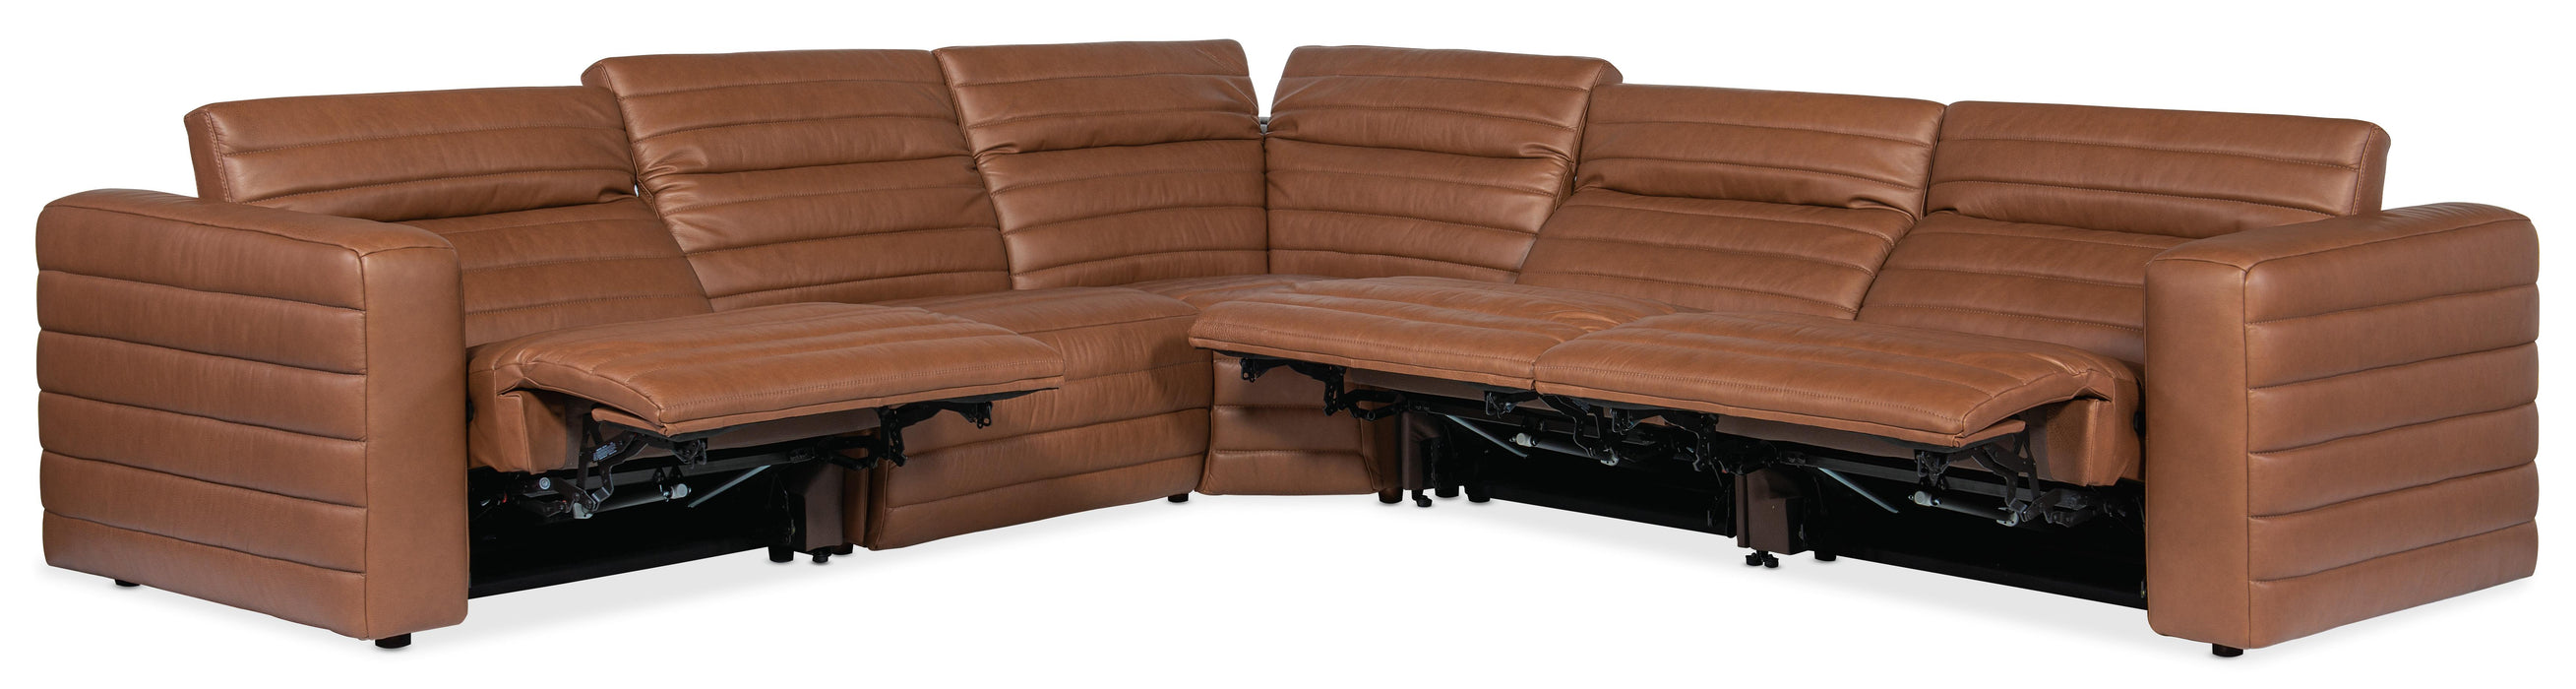 Chatelain 5-Piece Power Headrest Sectional with 2 Power Recliners - SS454-G5PS-088